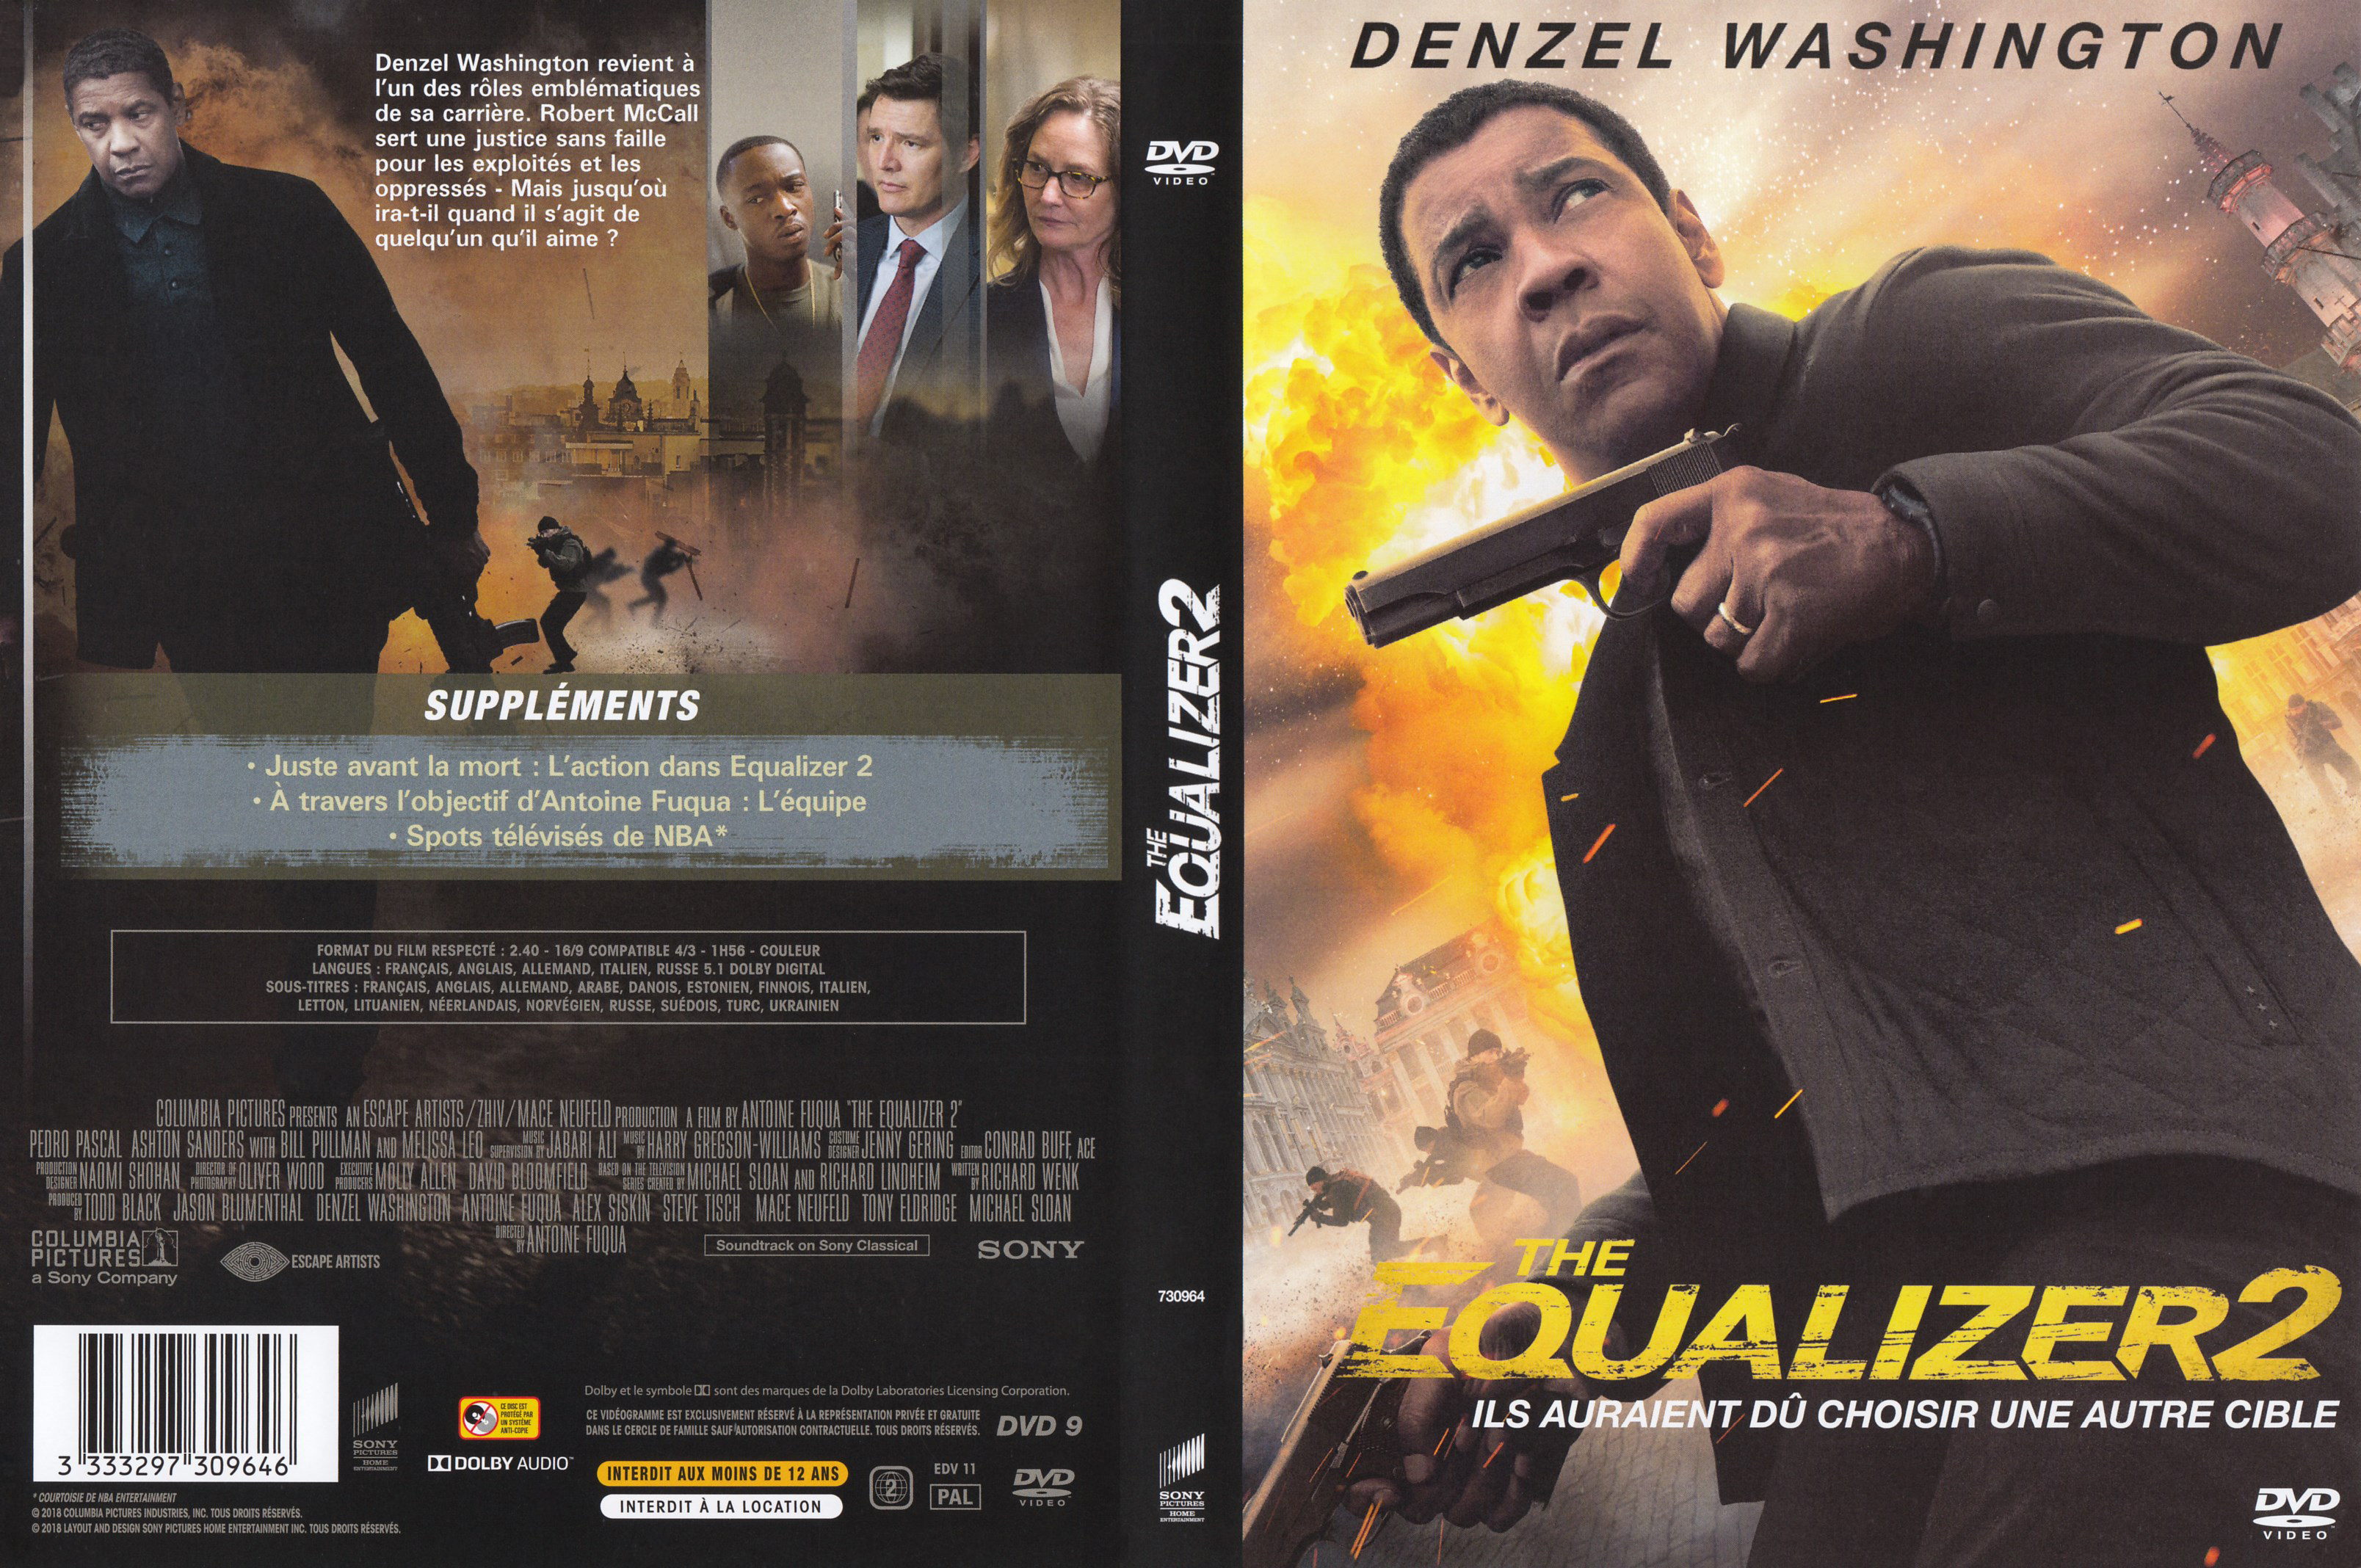 Jaquette DVD The equalizer 2